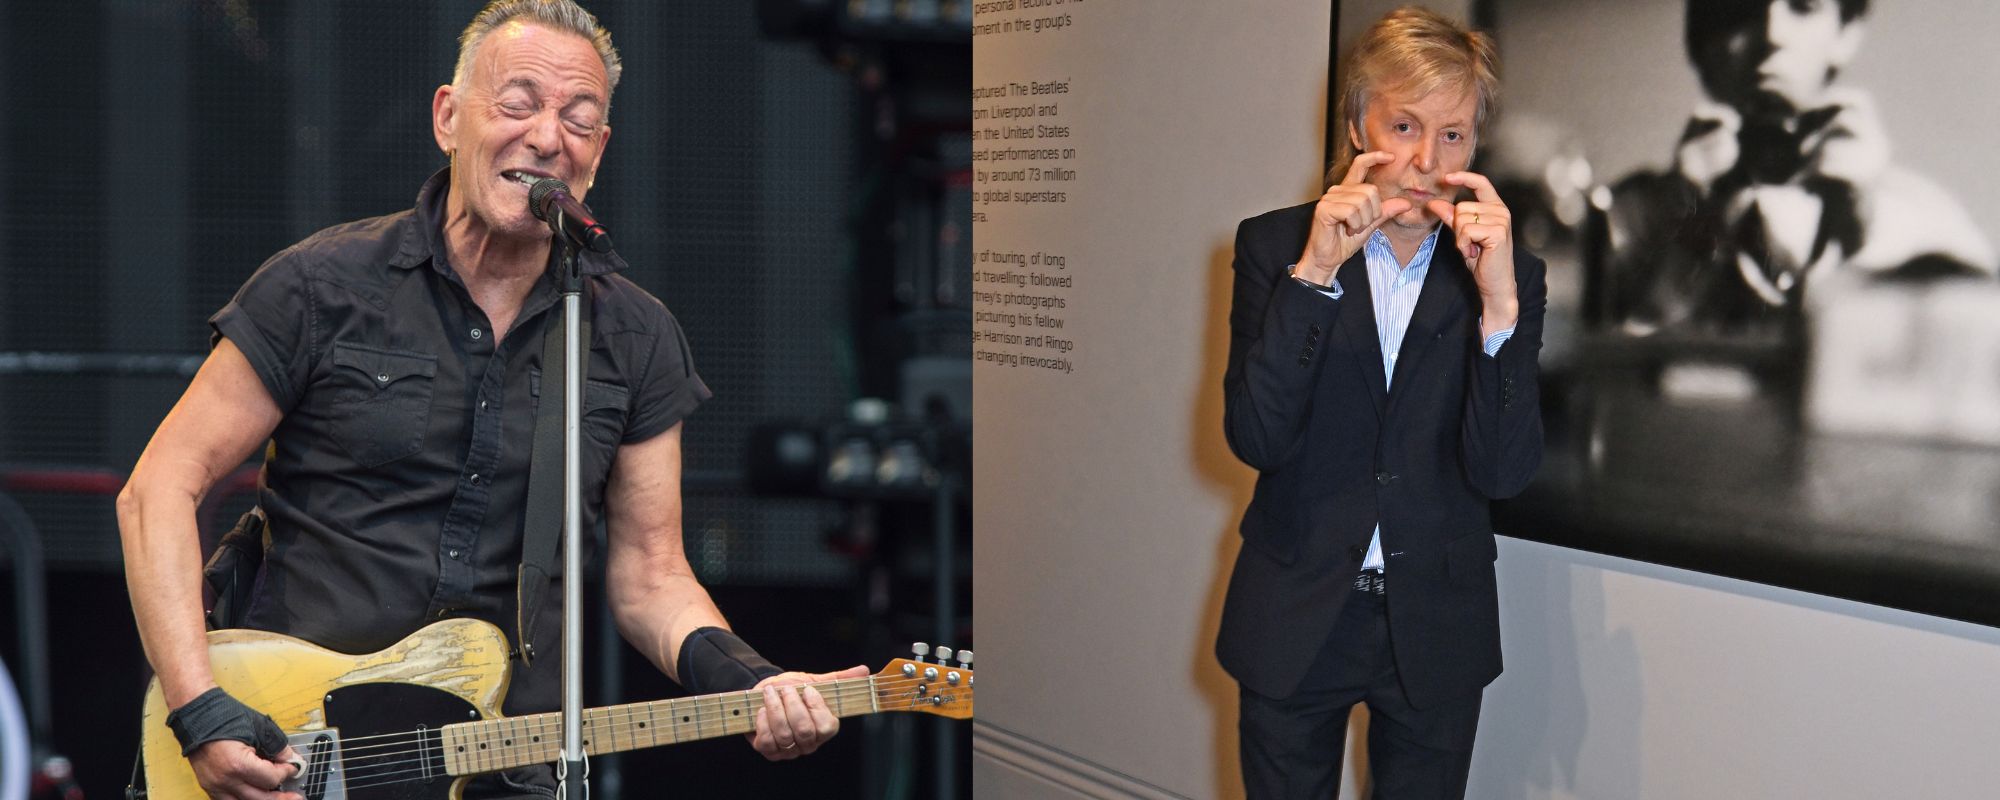 Paul McCartney Claims Bruce Springsteen ‘Ruined’ Live Concerts While Launching His Photo Exhibition